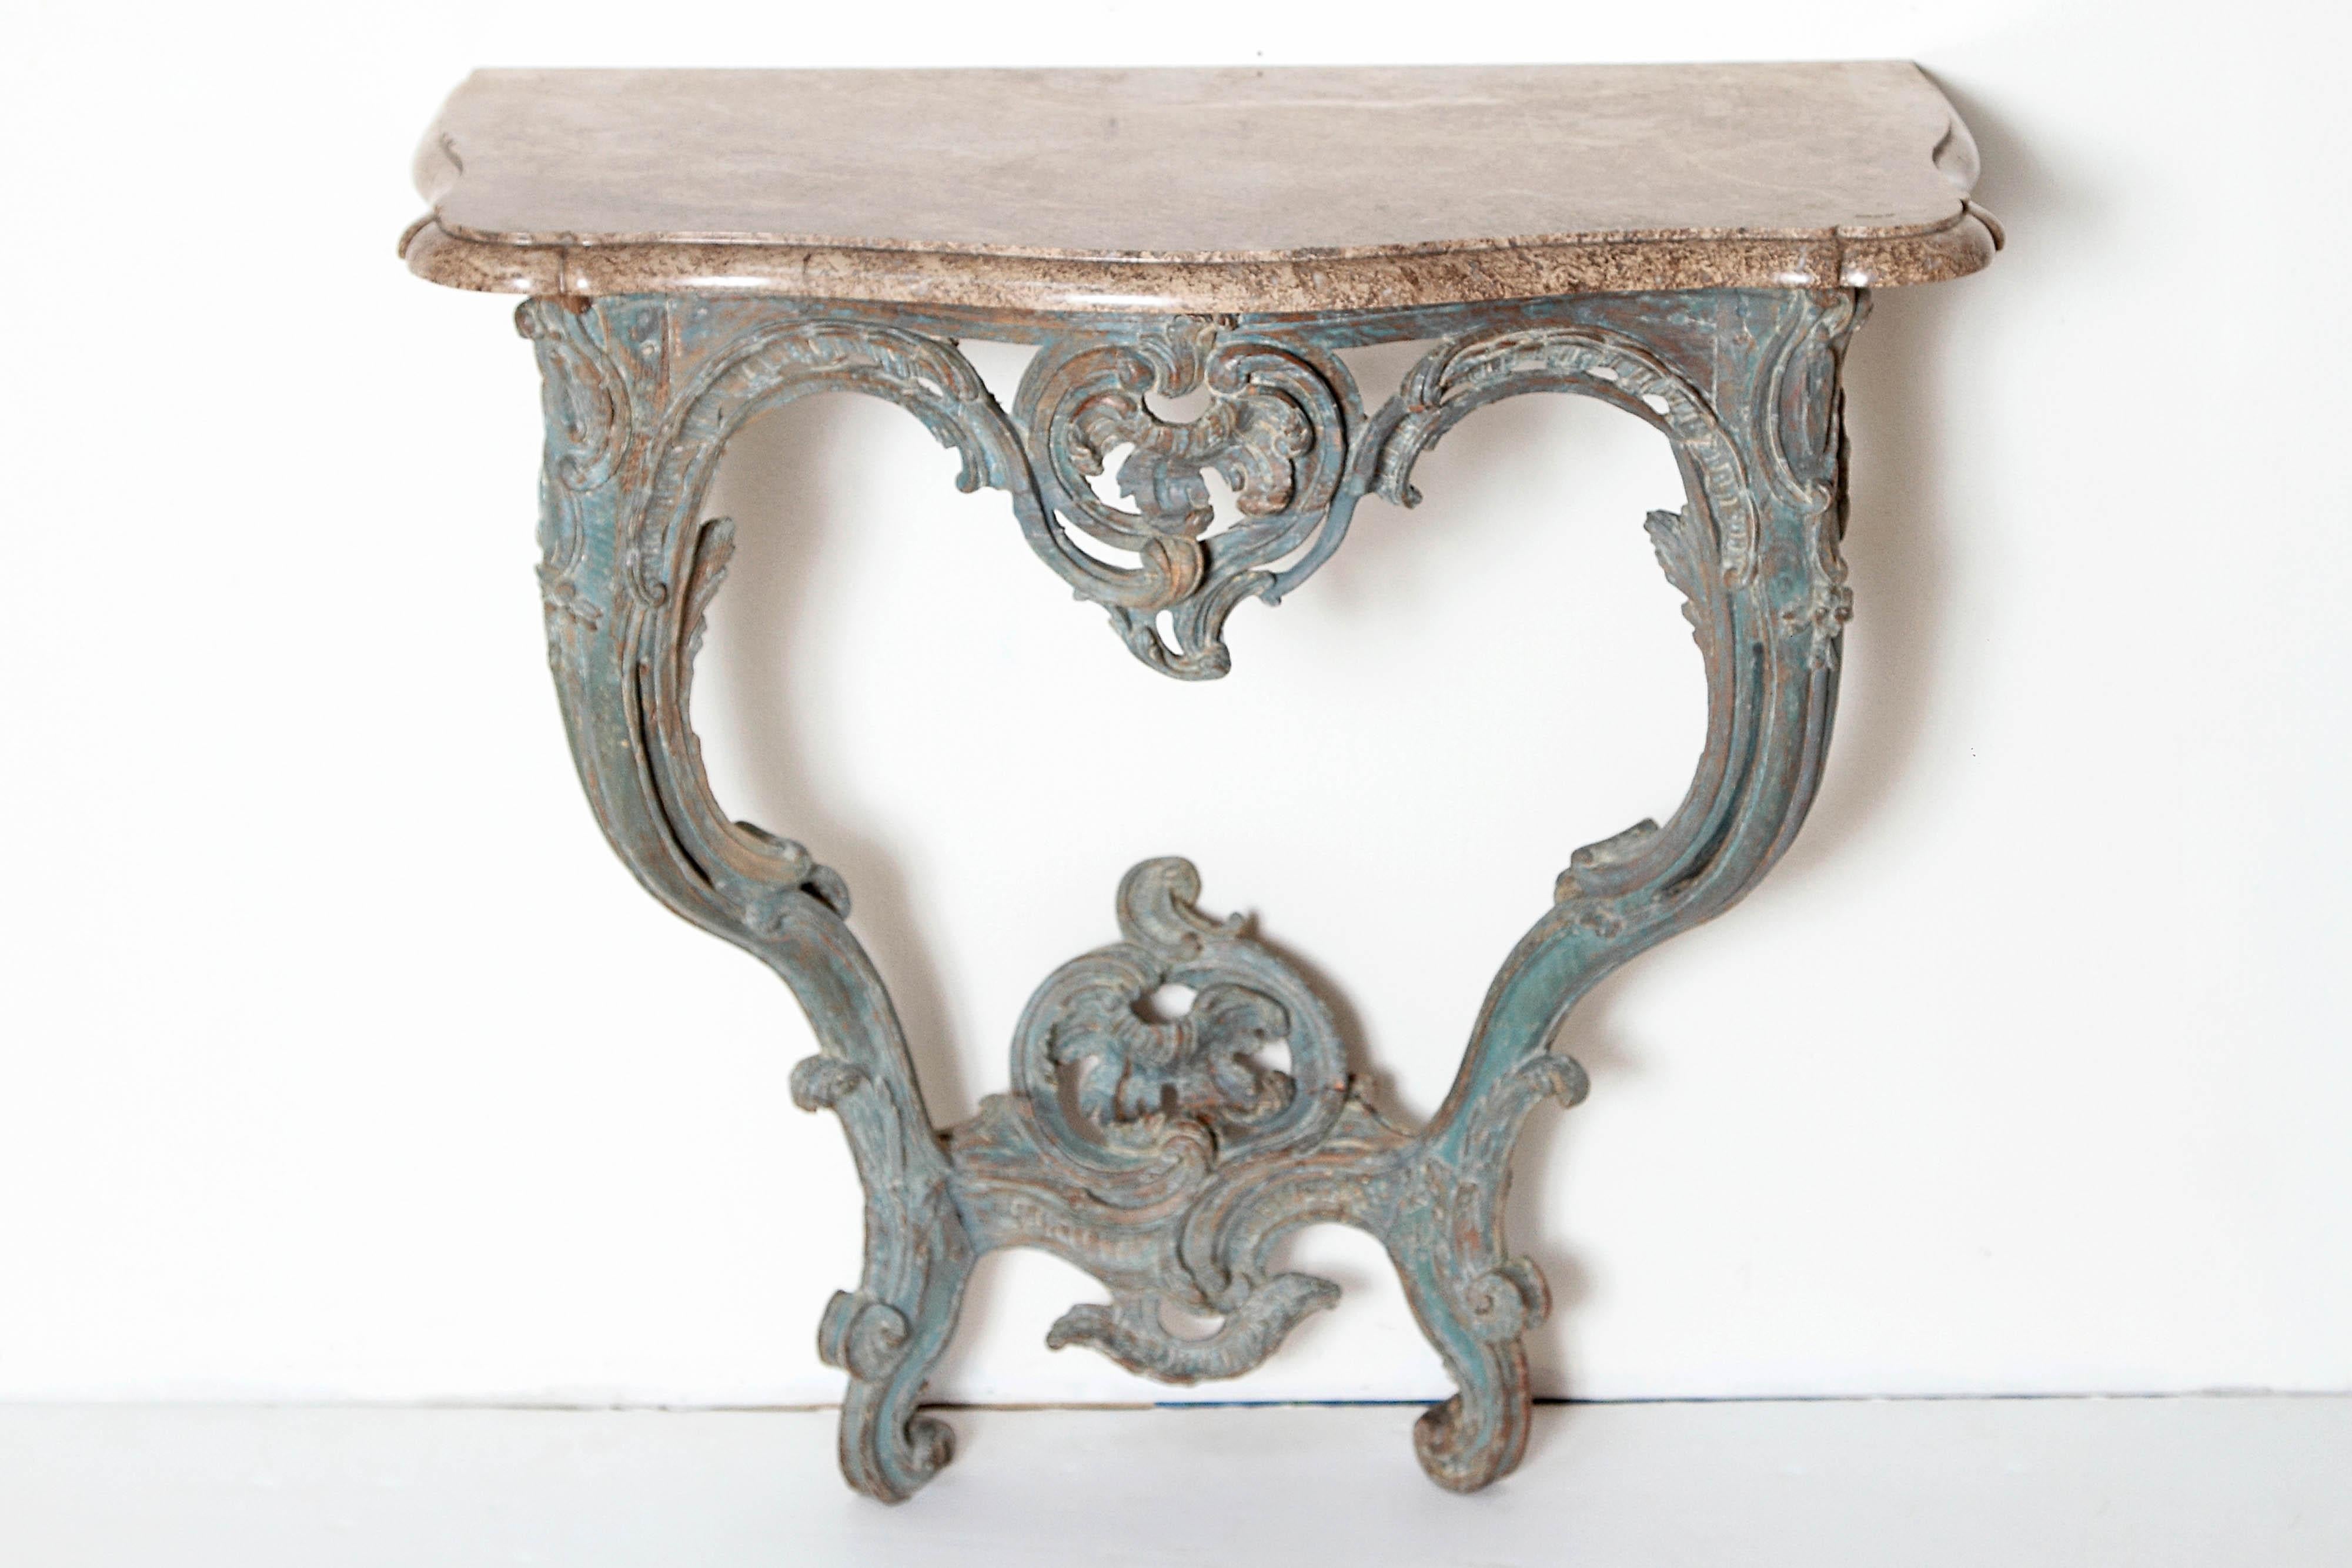 A French Louis XV highly carved / Rococo console with original blue paint. Surmounted by a serpentine moulded beige marble top above a rocaille cartouche. The frieze is scroll-carved and pierced. Two cabriole legs connected with a rocaille